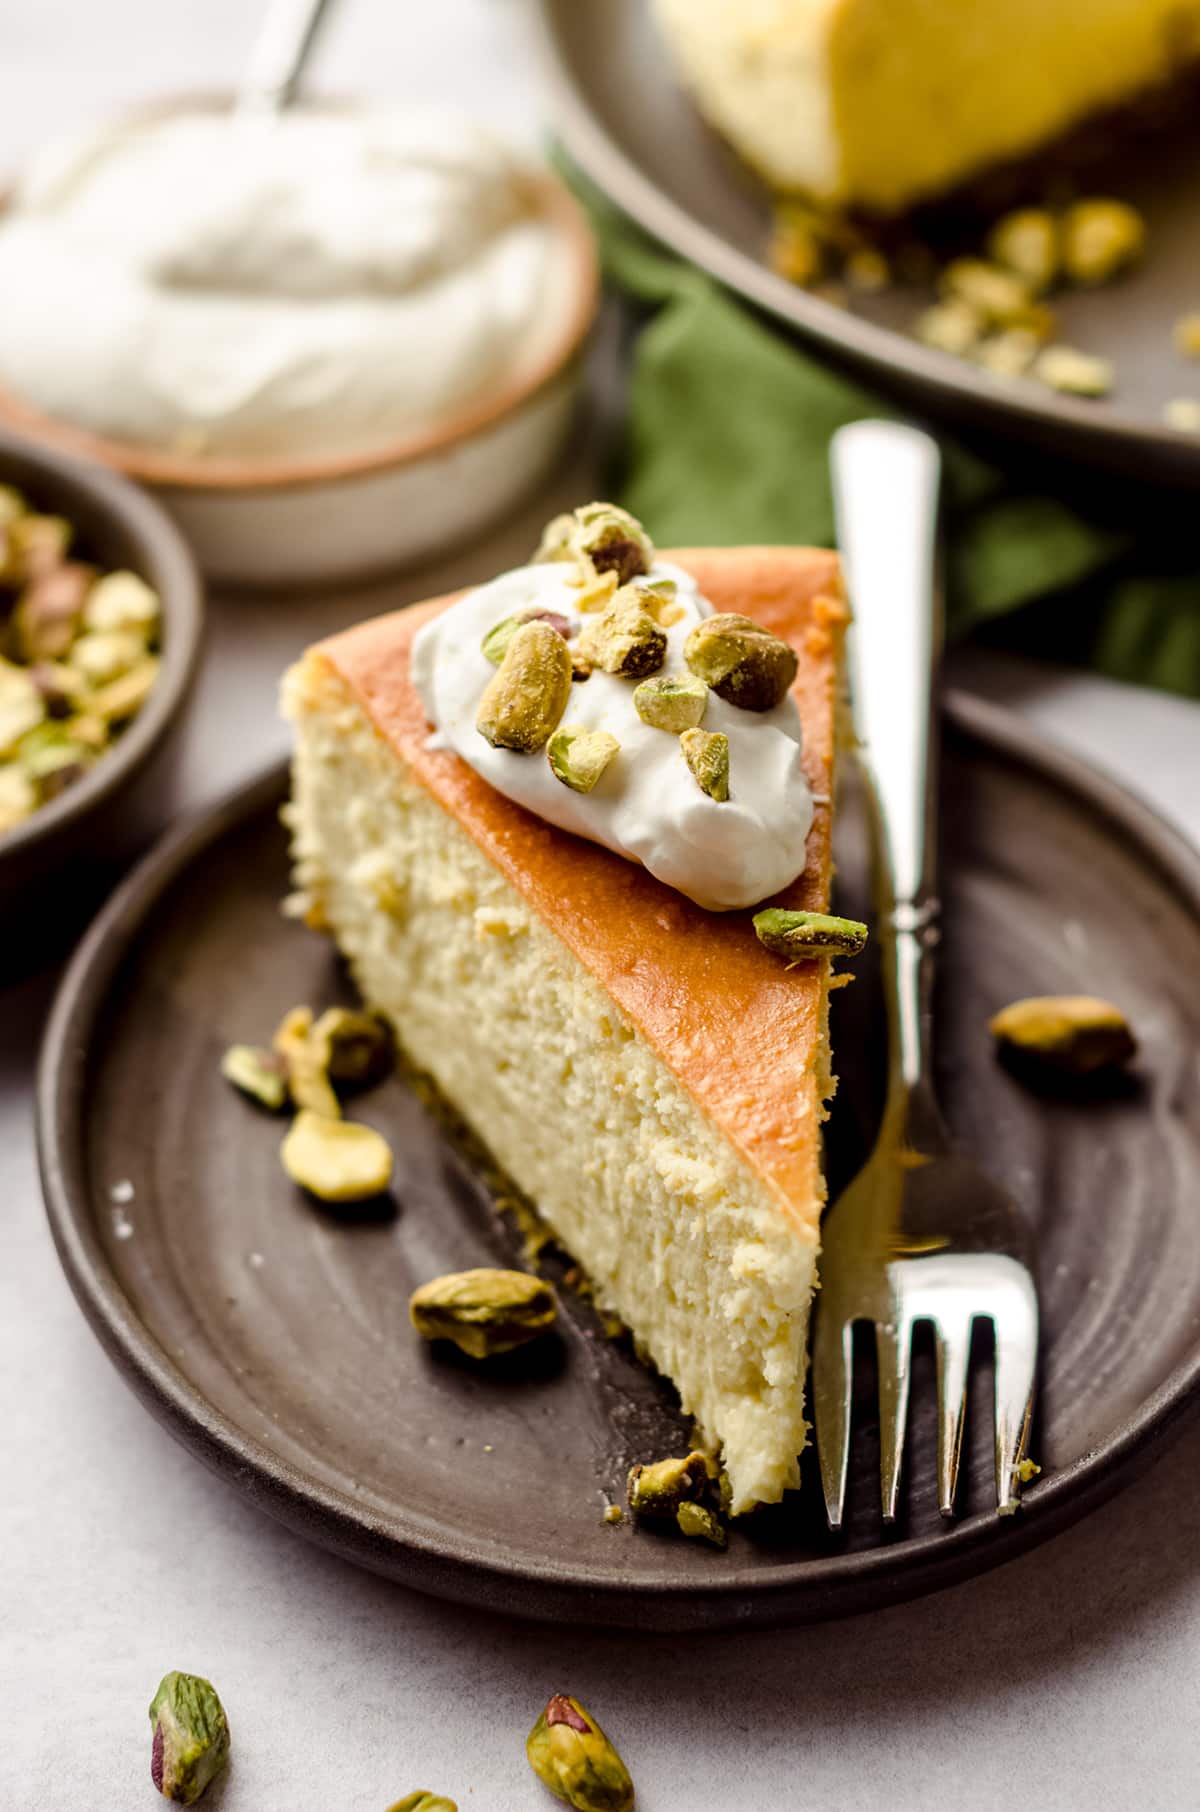 slice of pistachio cheesecake on a plate